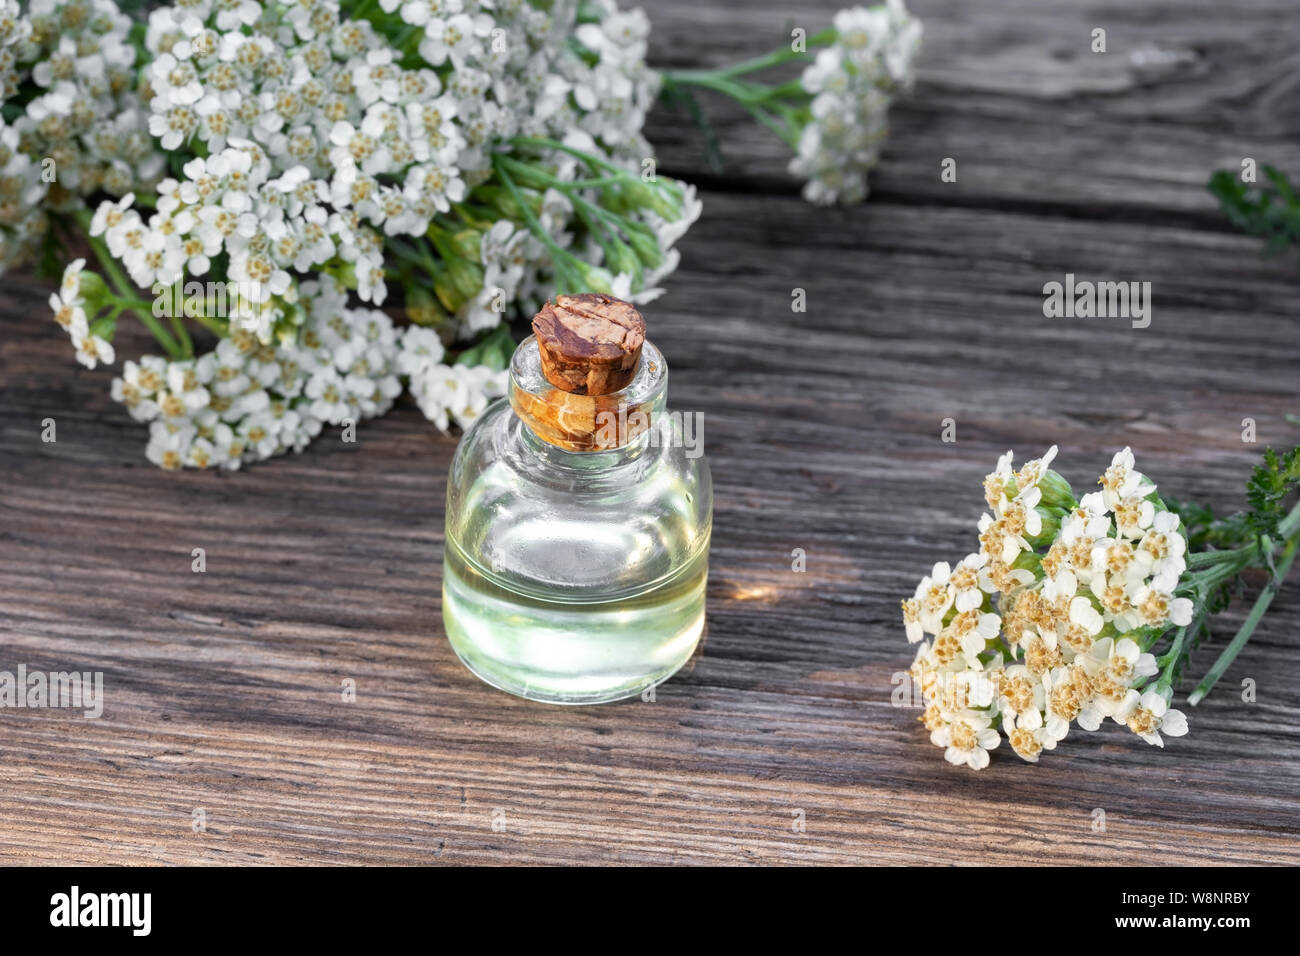 A bottle of essential oil with blooming yarrow plant Stock Photo